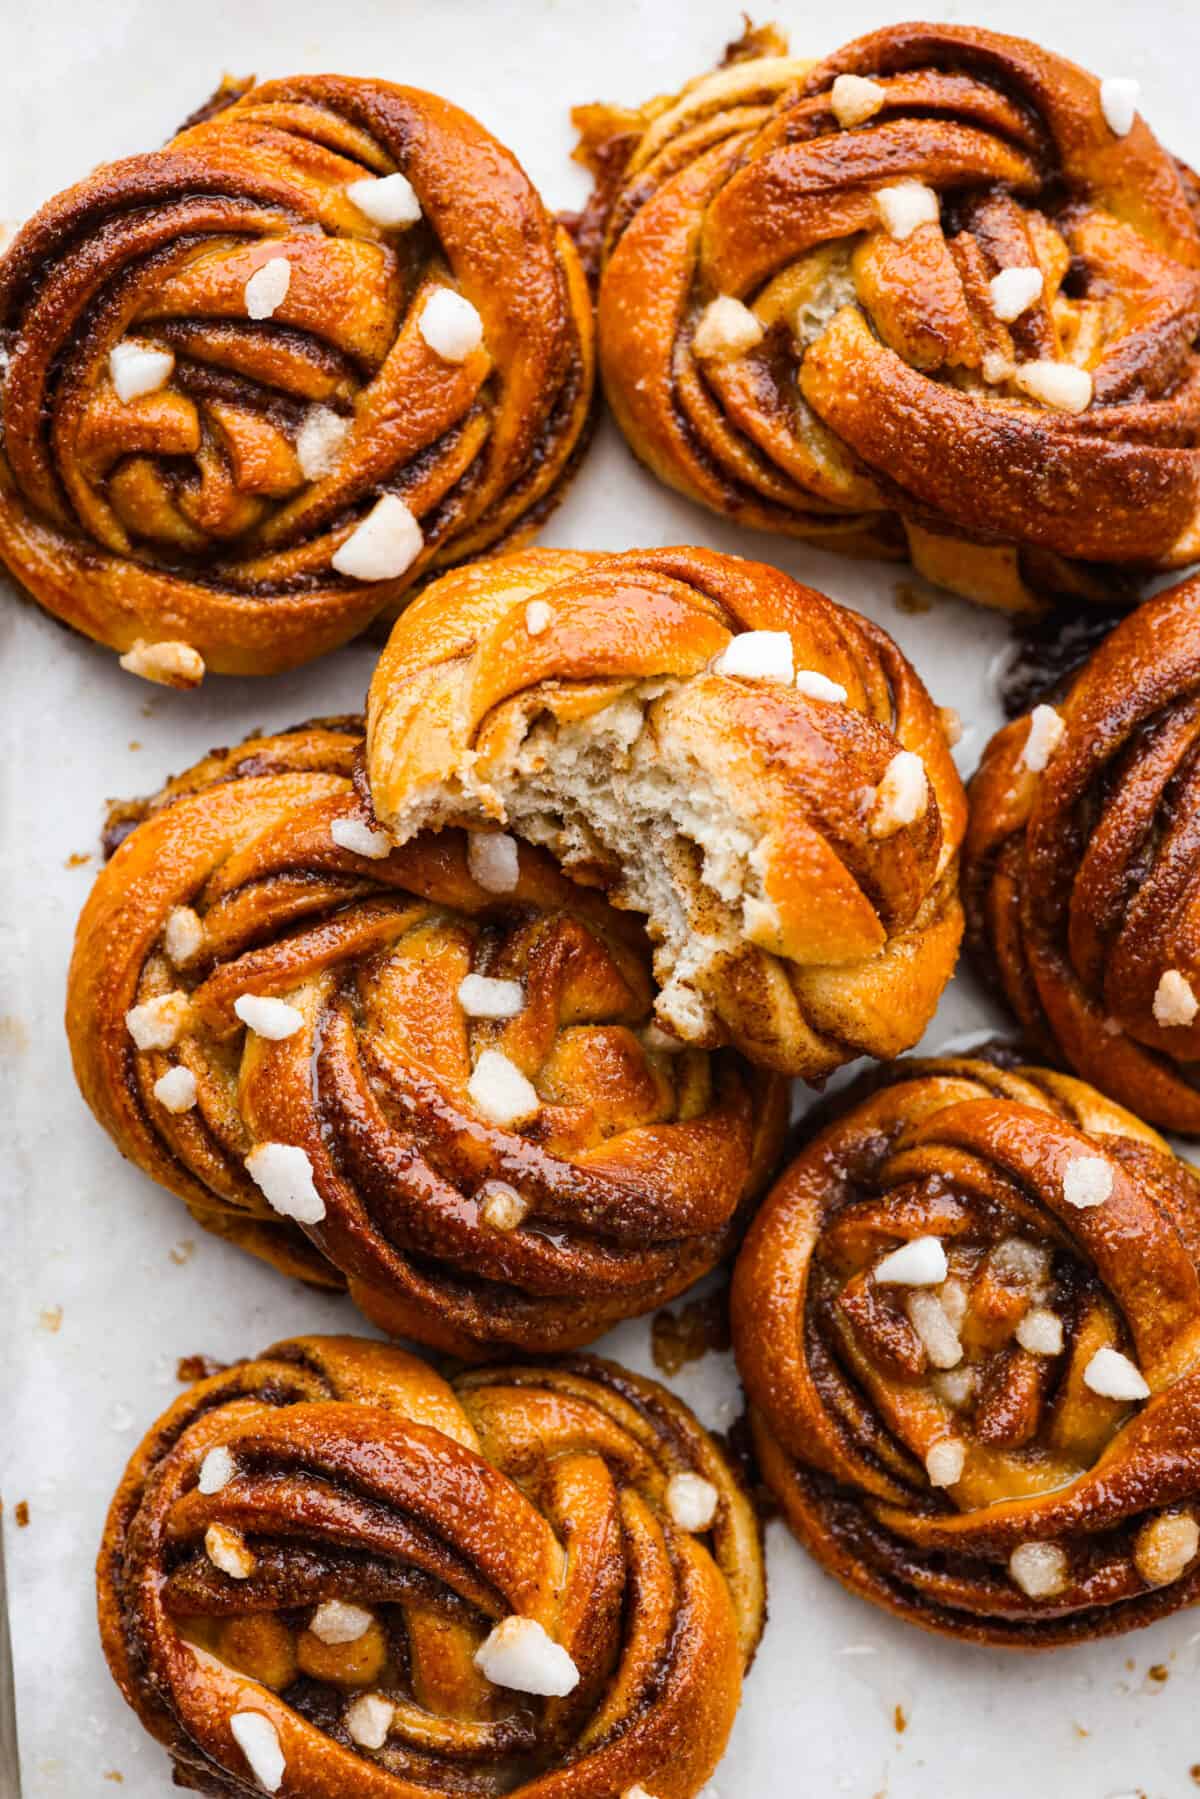 Closeup of kanelbullar buns topped with pearl sugar. One has been torn in half.